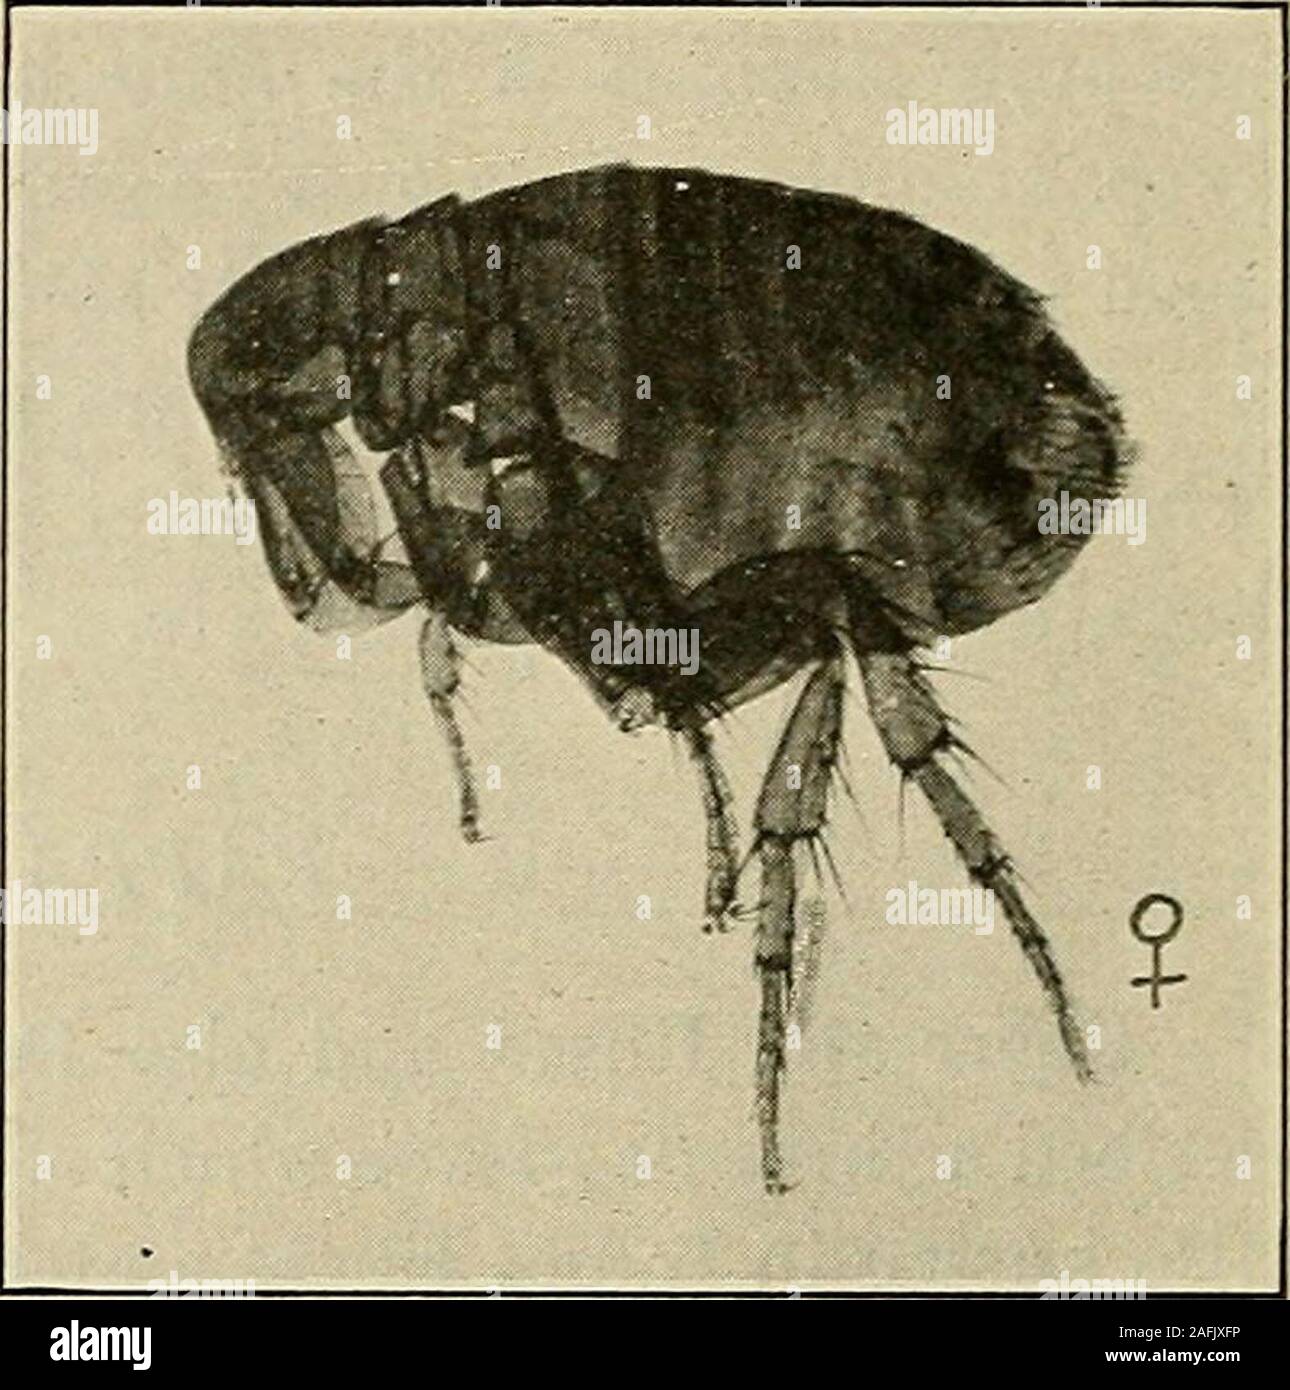 . Preventive medicine and hygiene. Fig. 40.—The Indian Rat Flea {Xenopsylla cheopis Rothsc.)} Then they spin flat, white, silken cocoons in which they transform tothe pupal stage. In from 5 to 8 days the adult flea emerges from thecocoon. The period of their transformation is affected by the tempera-ture and moisture. In warm, damp weather a generation may developin ten days or two weeks, but usually about 18 days to three weeks Stock Photo